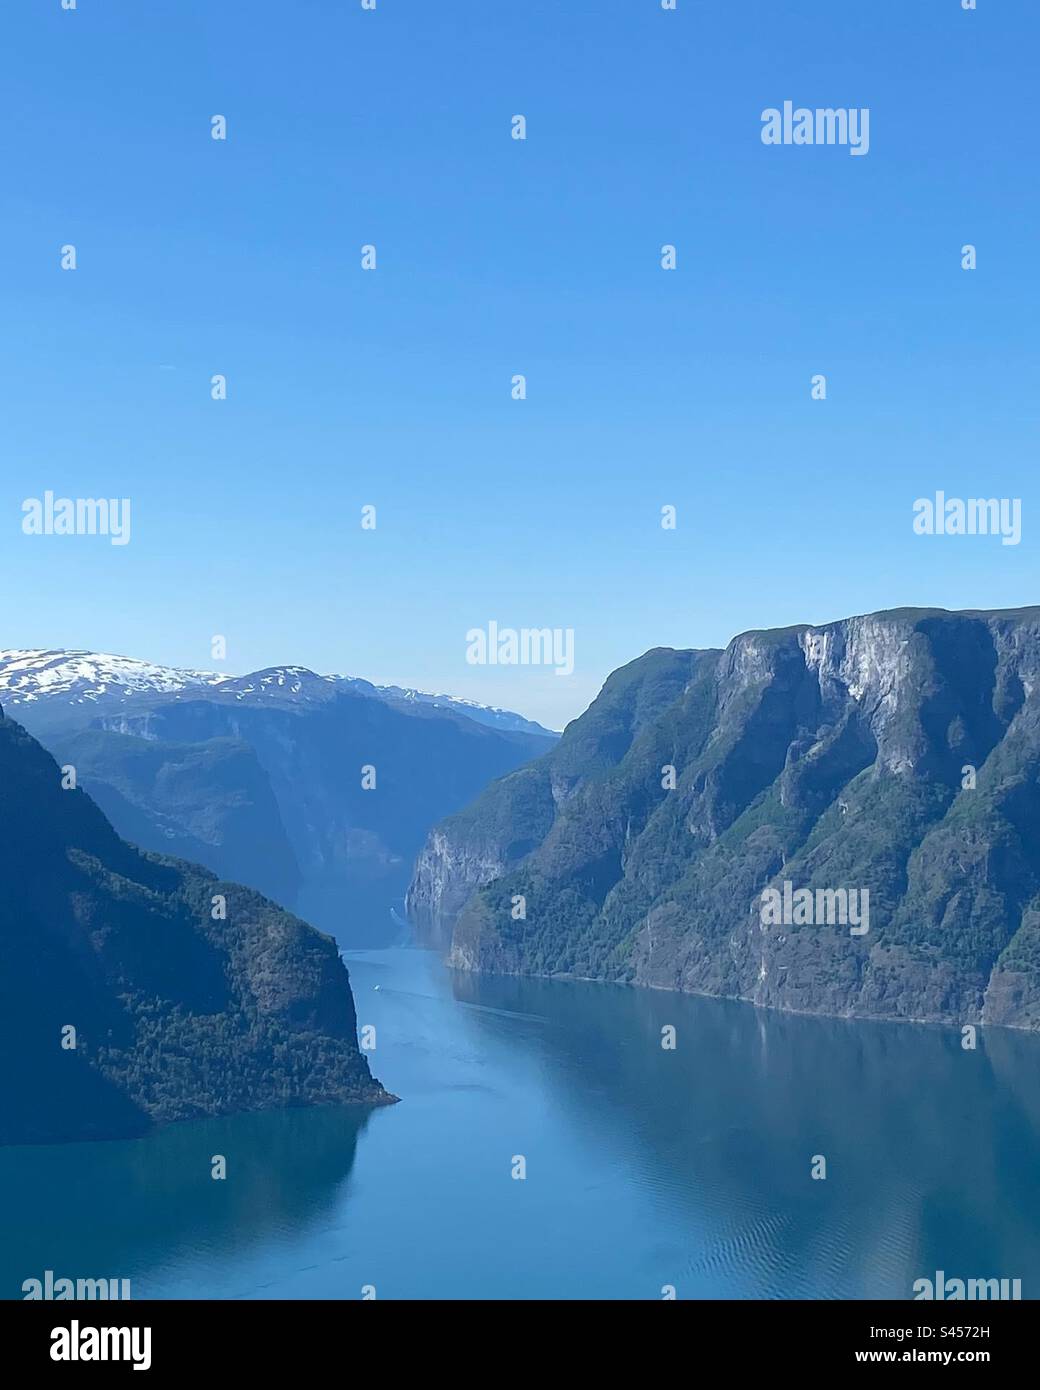 The view from fjords in Flåm village, Sweden is unreal! You can see the river winding through the valley, like a shimmering ribbon. Nature's artwork at its finest. Stock Photo